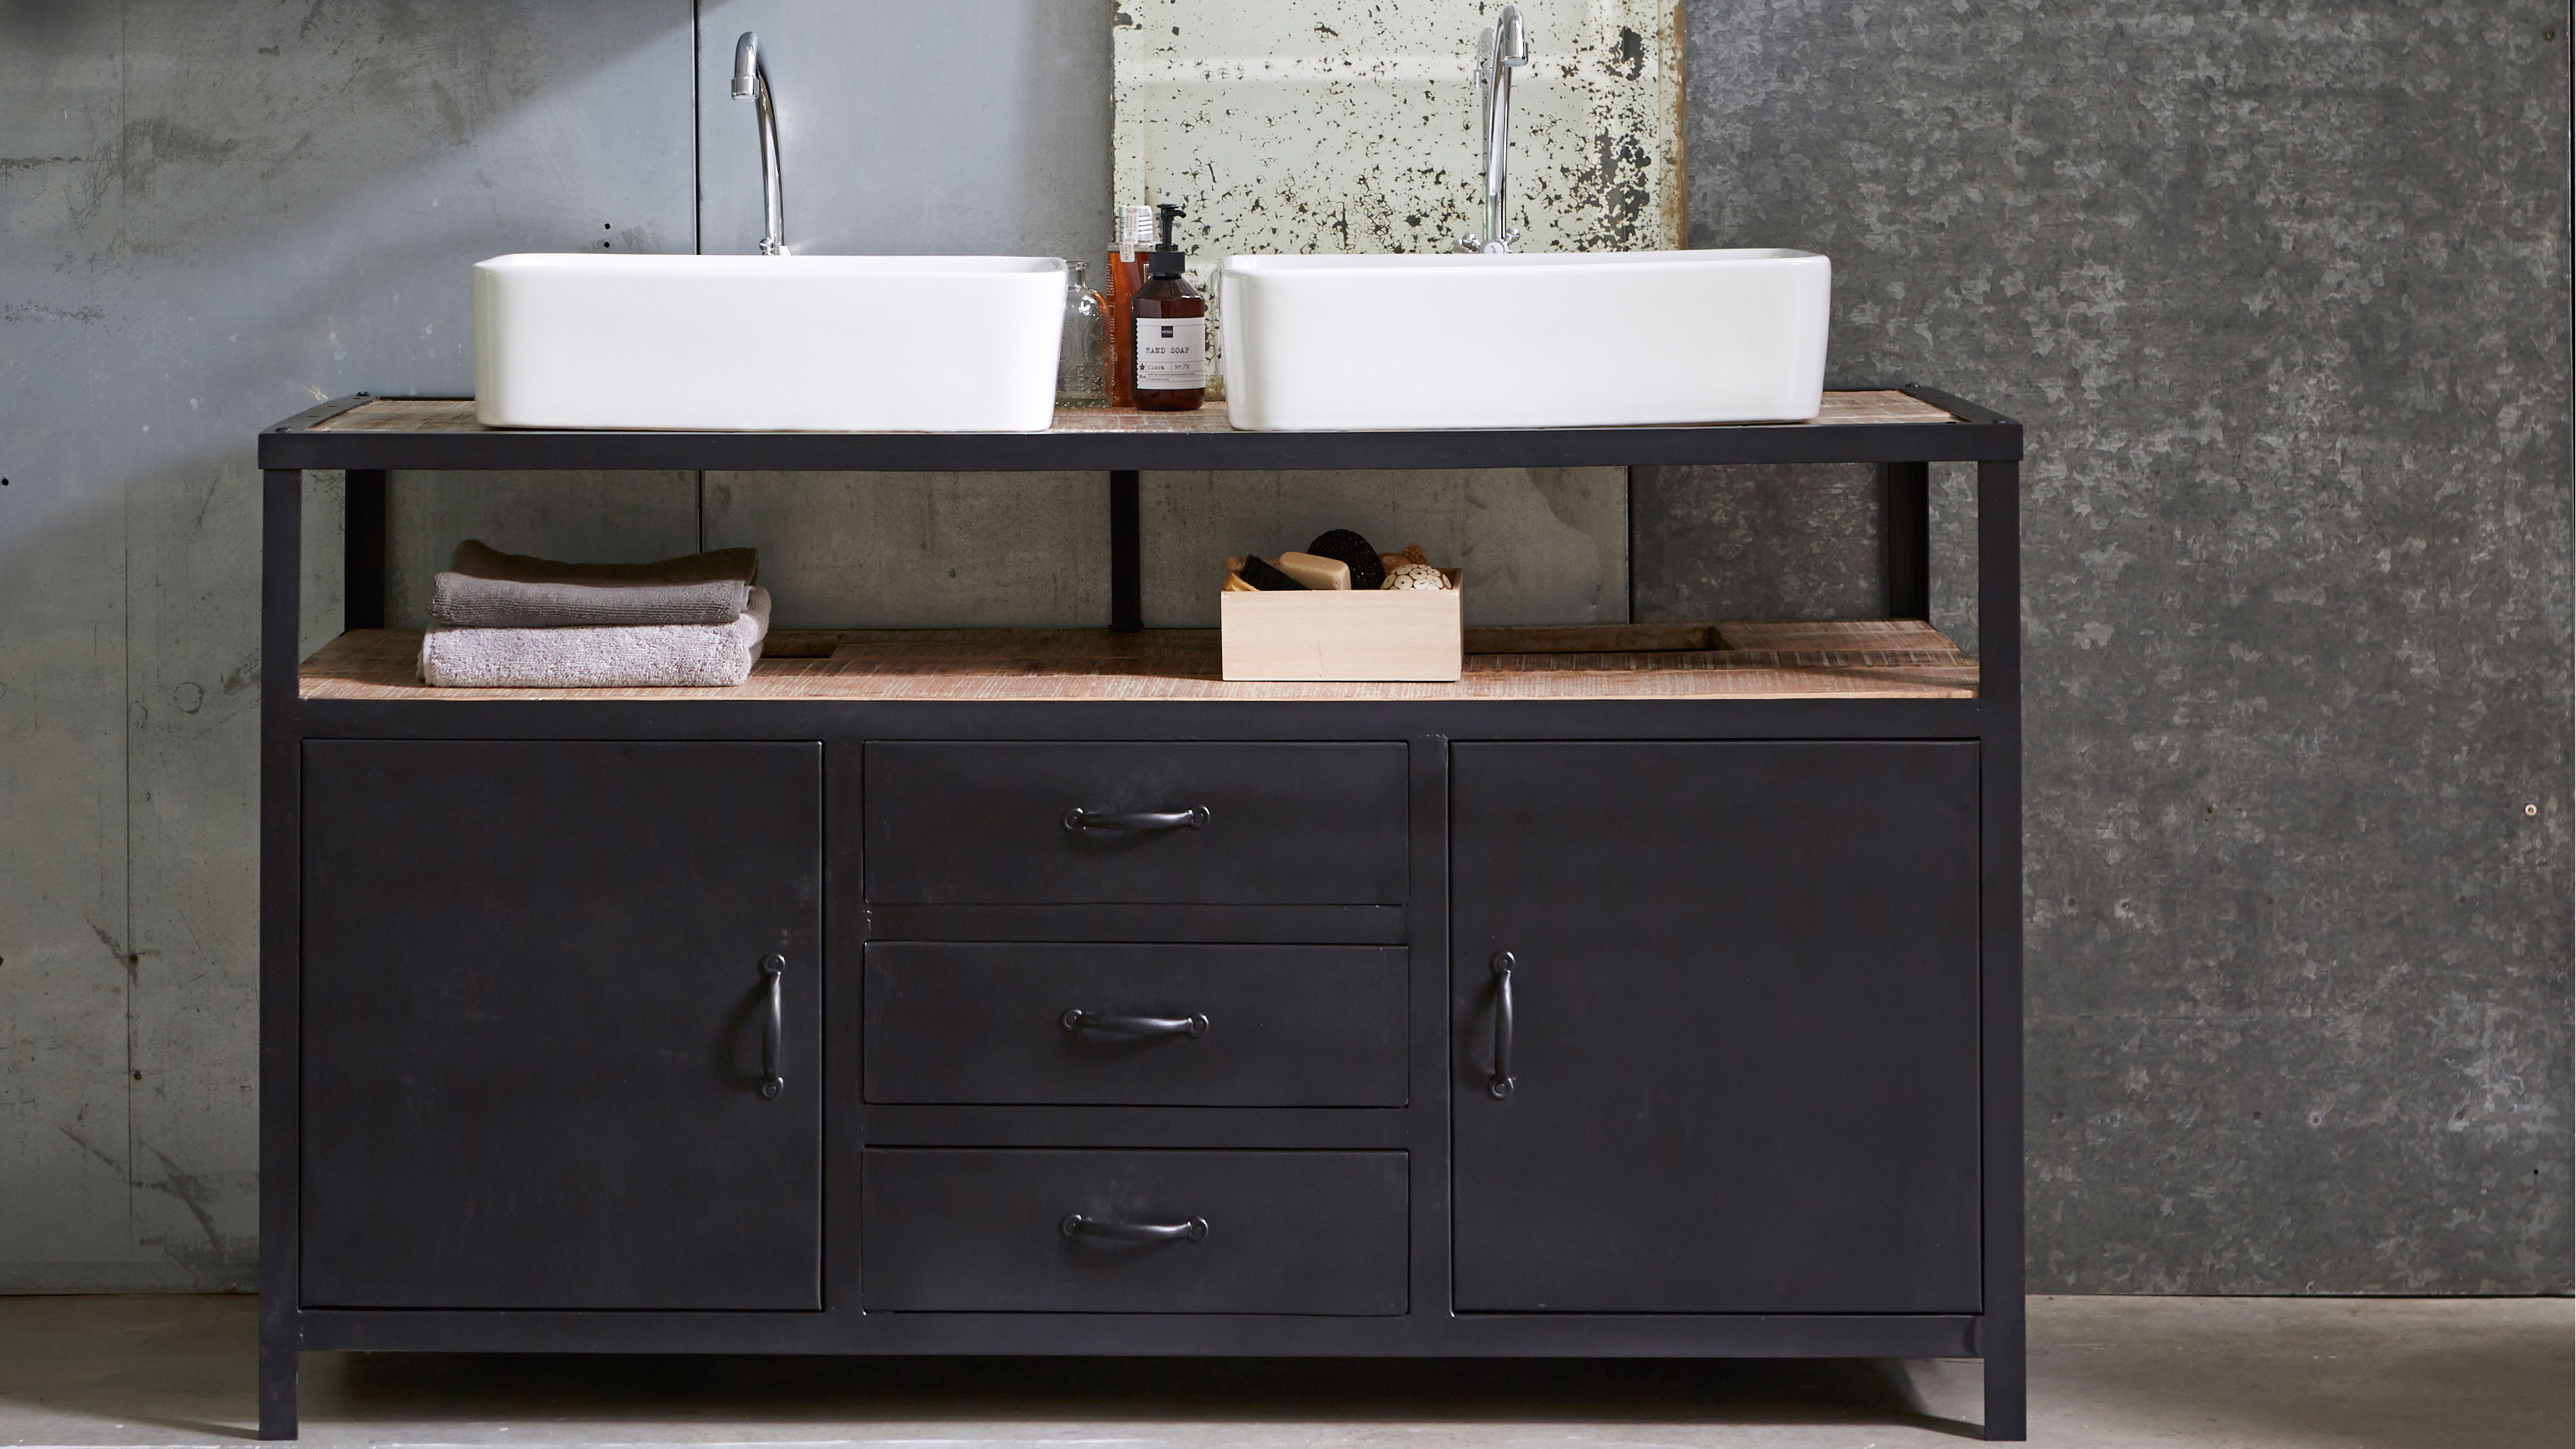 10 Of The Best Vanity Units Real Homes, What Company Makes The Best Bathroom Vanities